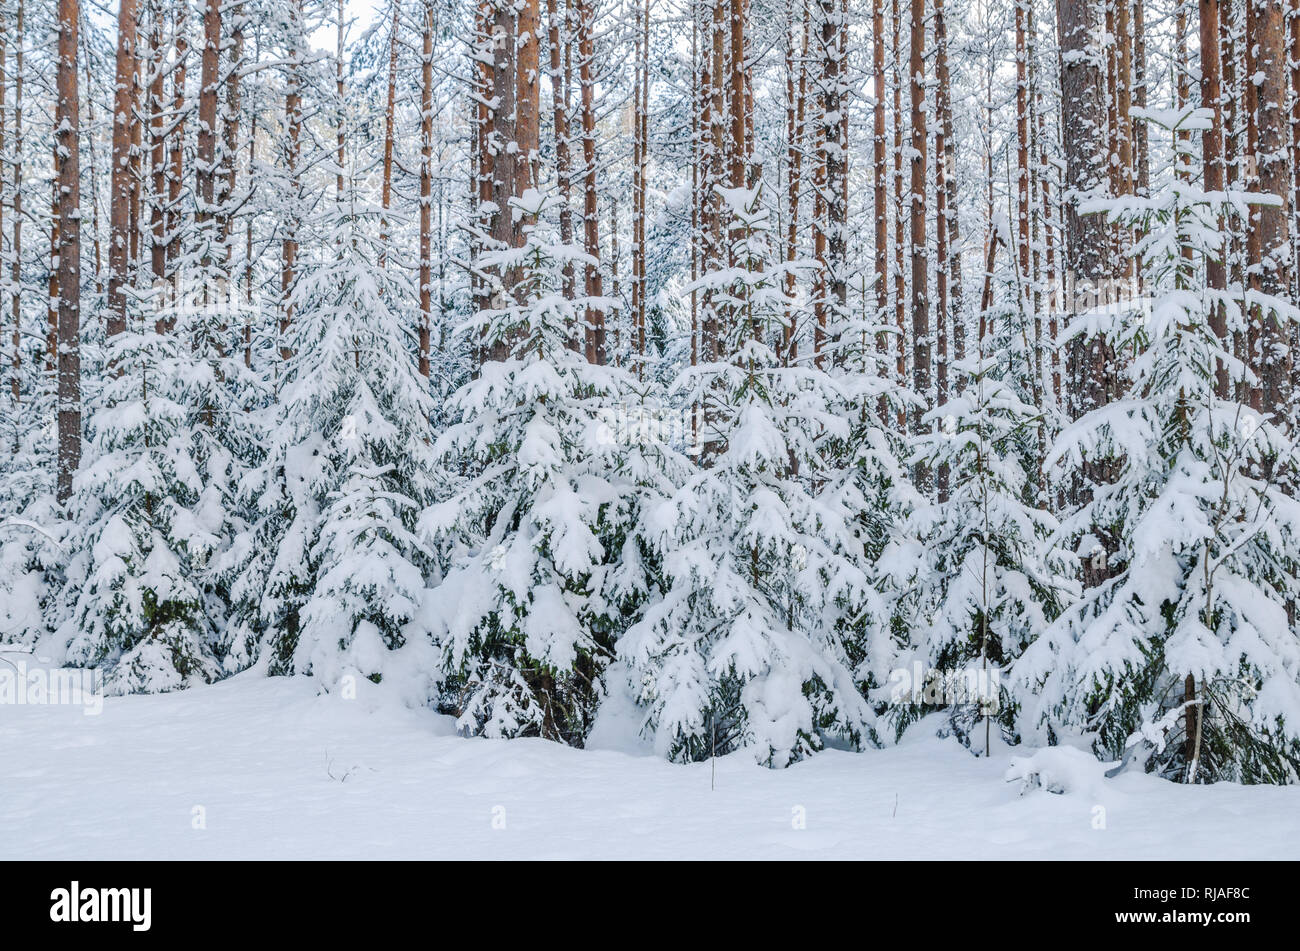 Firs and pines in the forest after snowfall Stock Photo